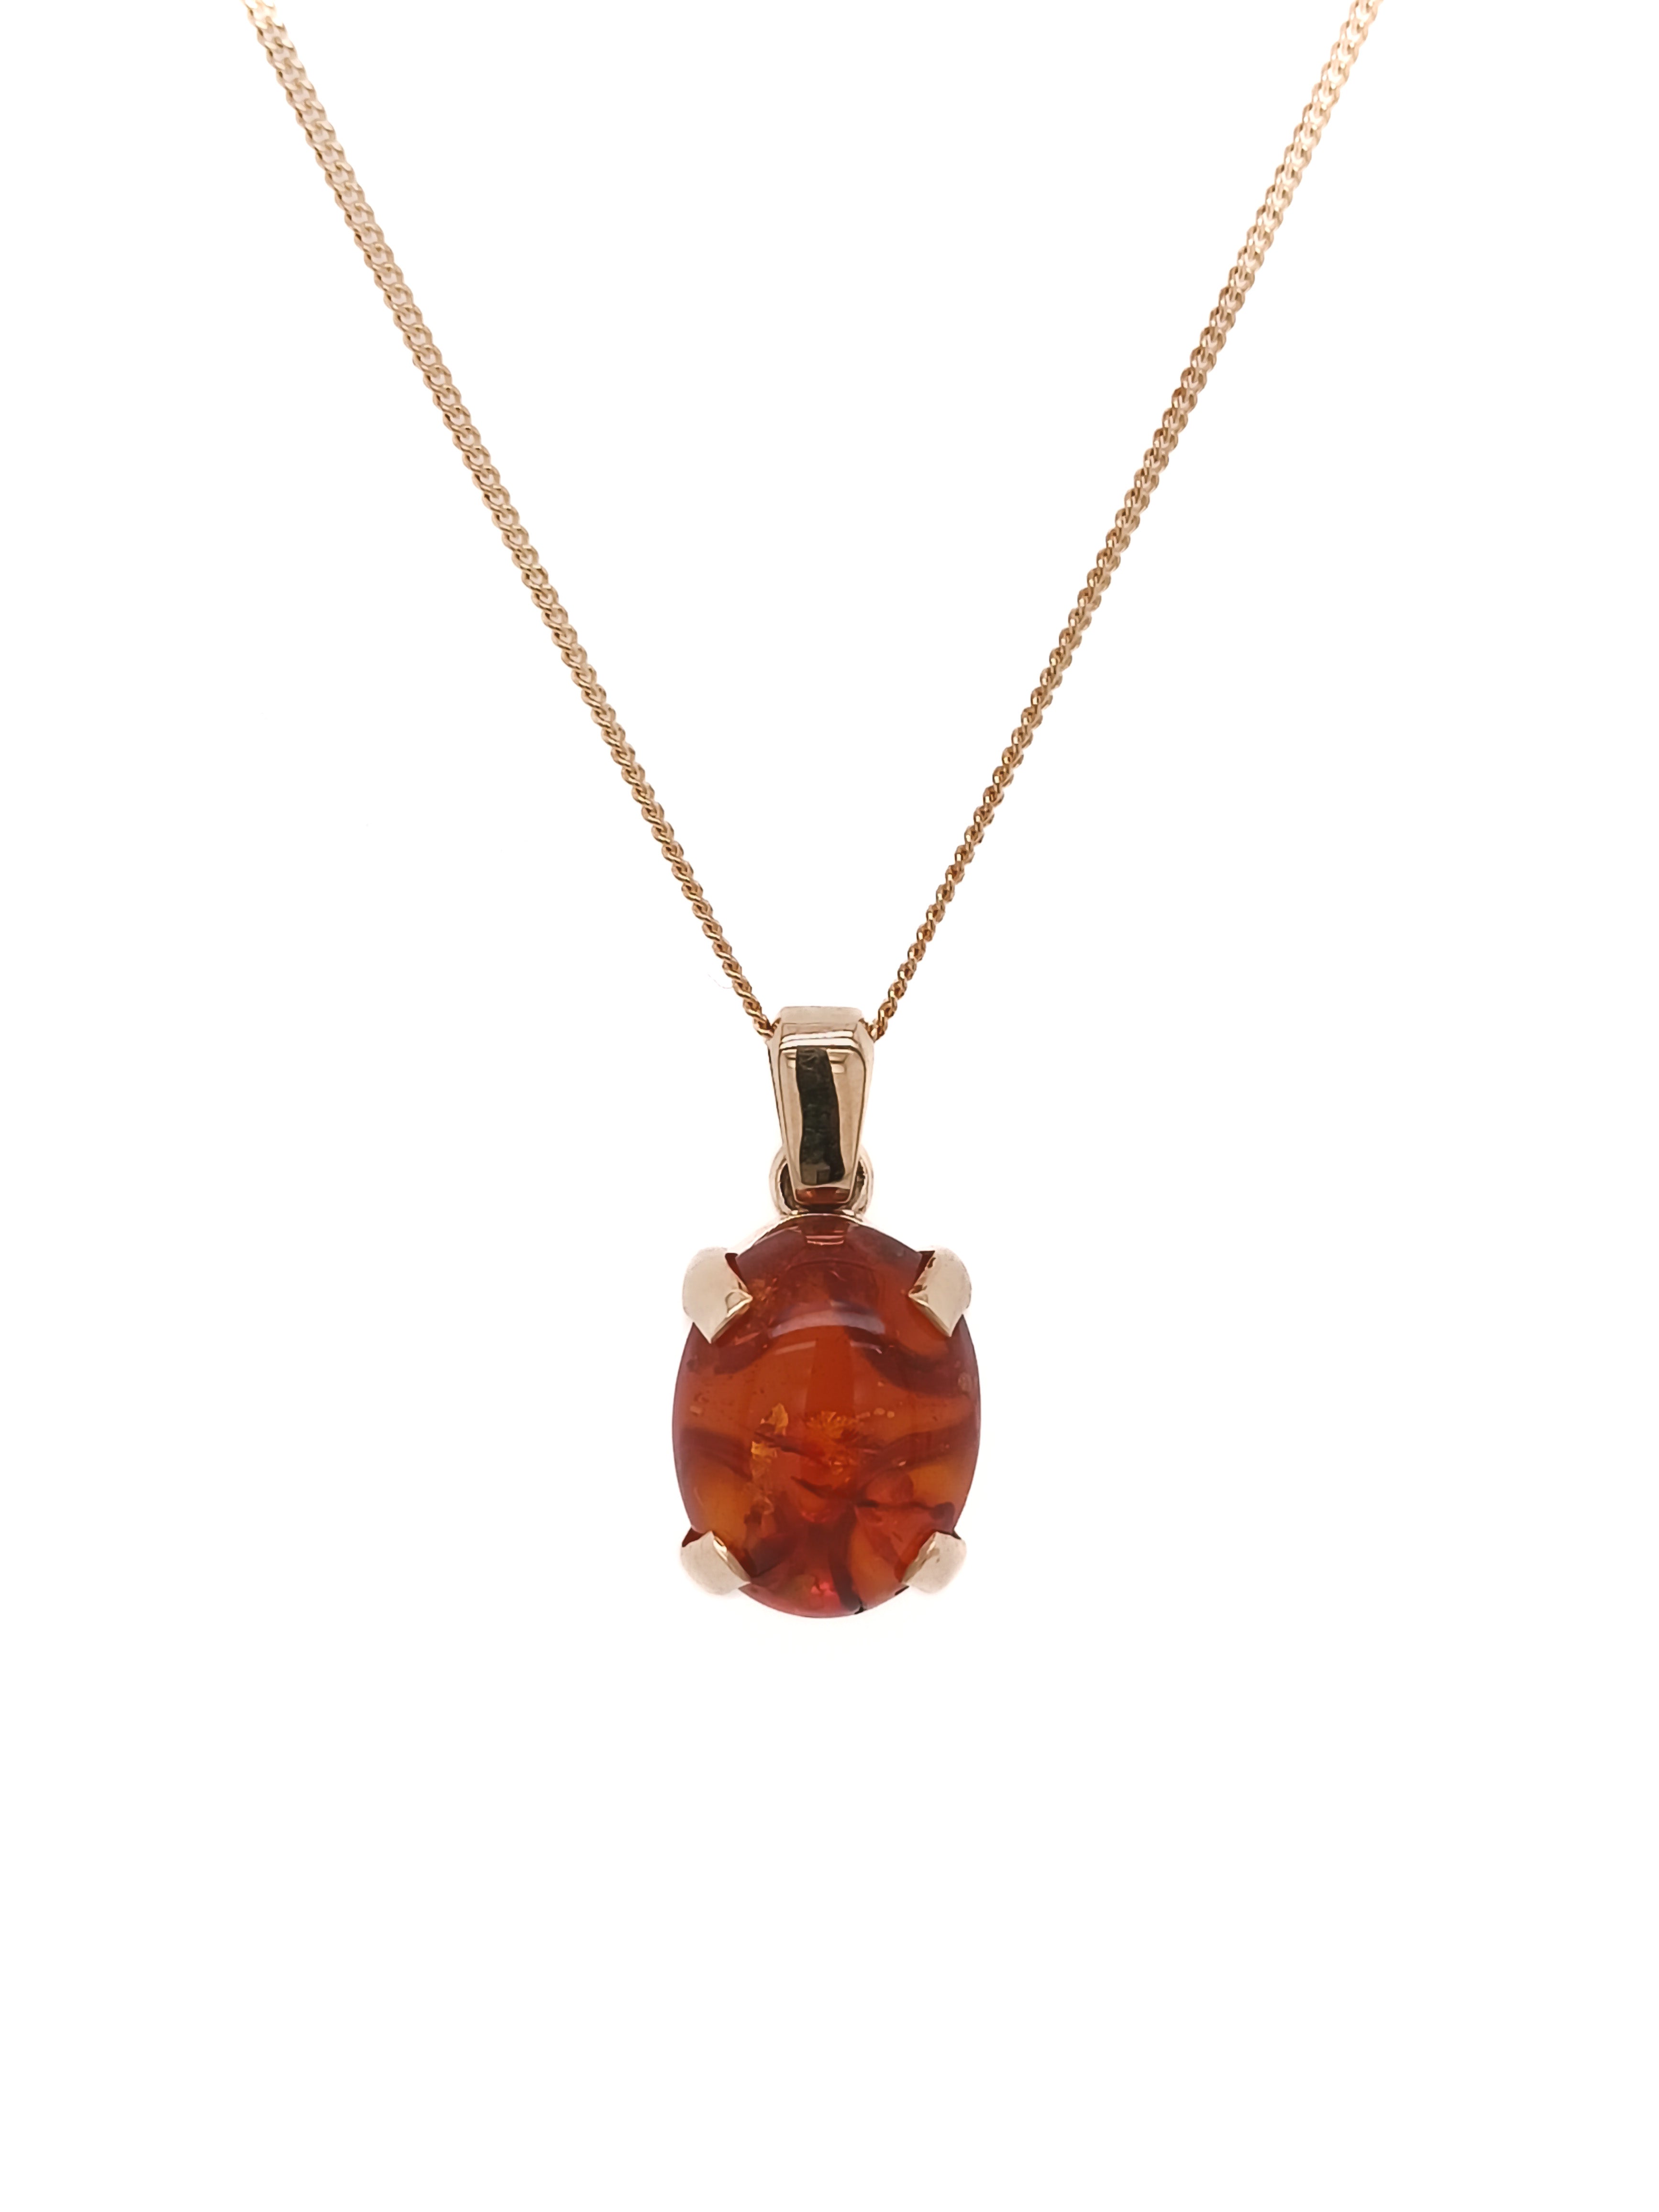 9ct Yellow Gold Oval Amber Pendant & Chain